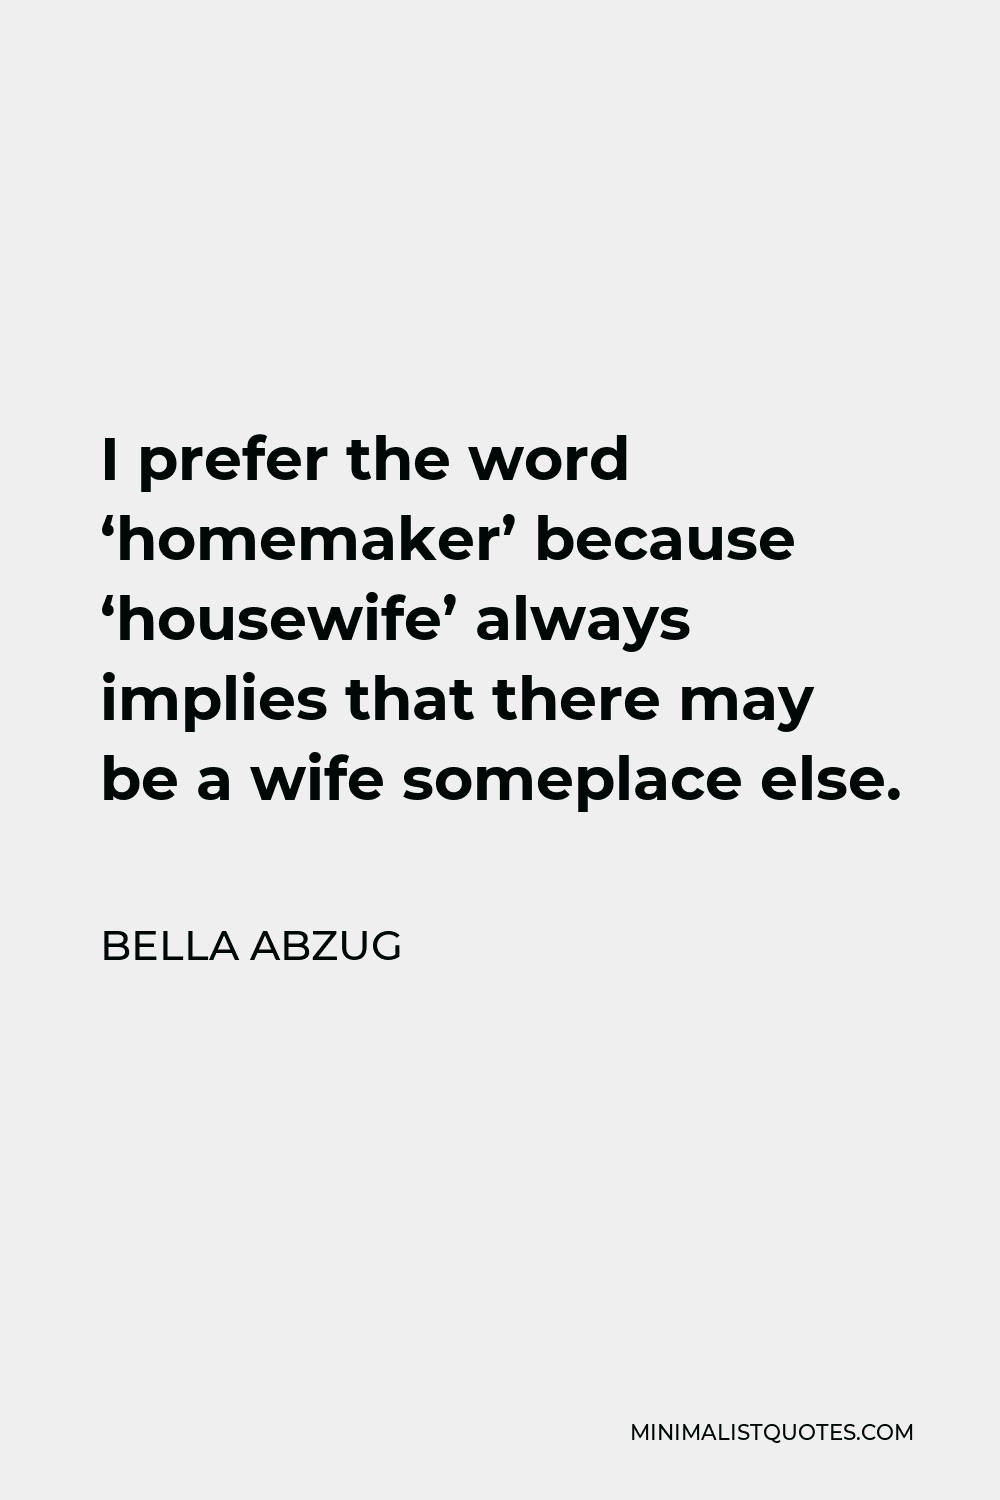 Bella Abzug Quote - I prefer the word ‘homemaker’ because ‘housewife’ always implies that there may be a wife someplace else.